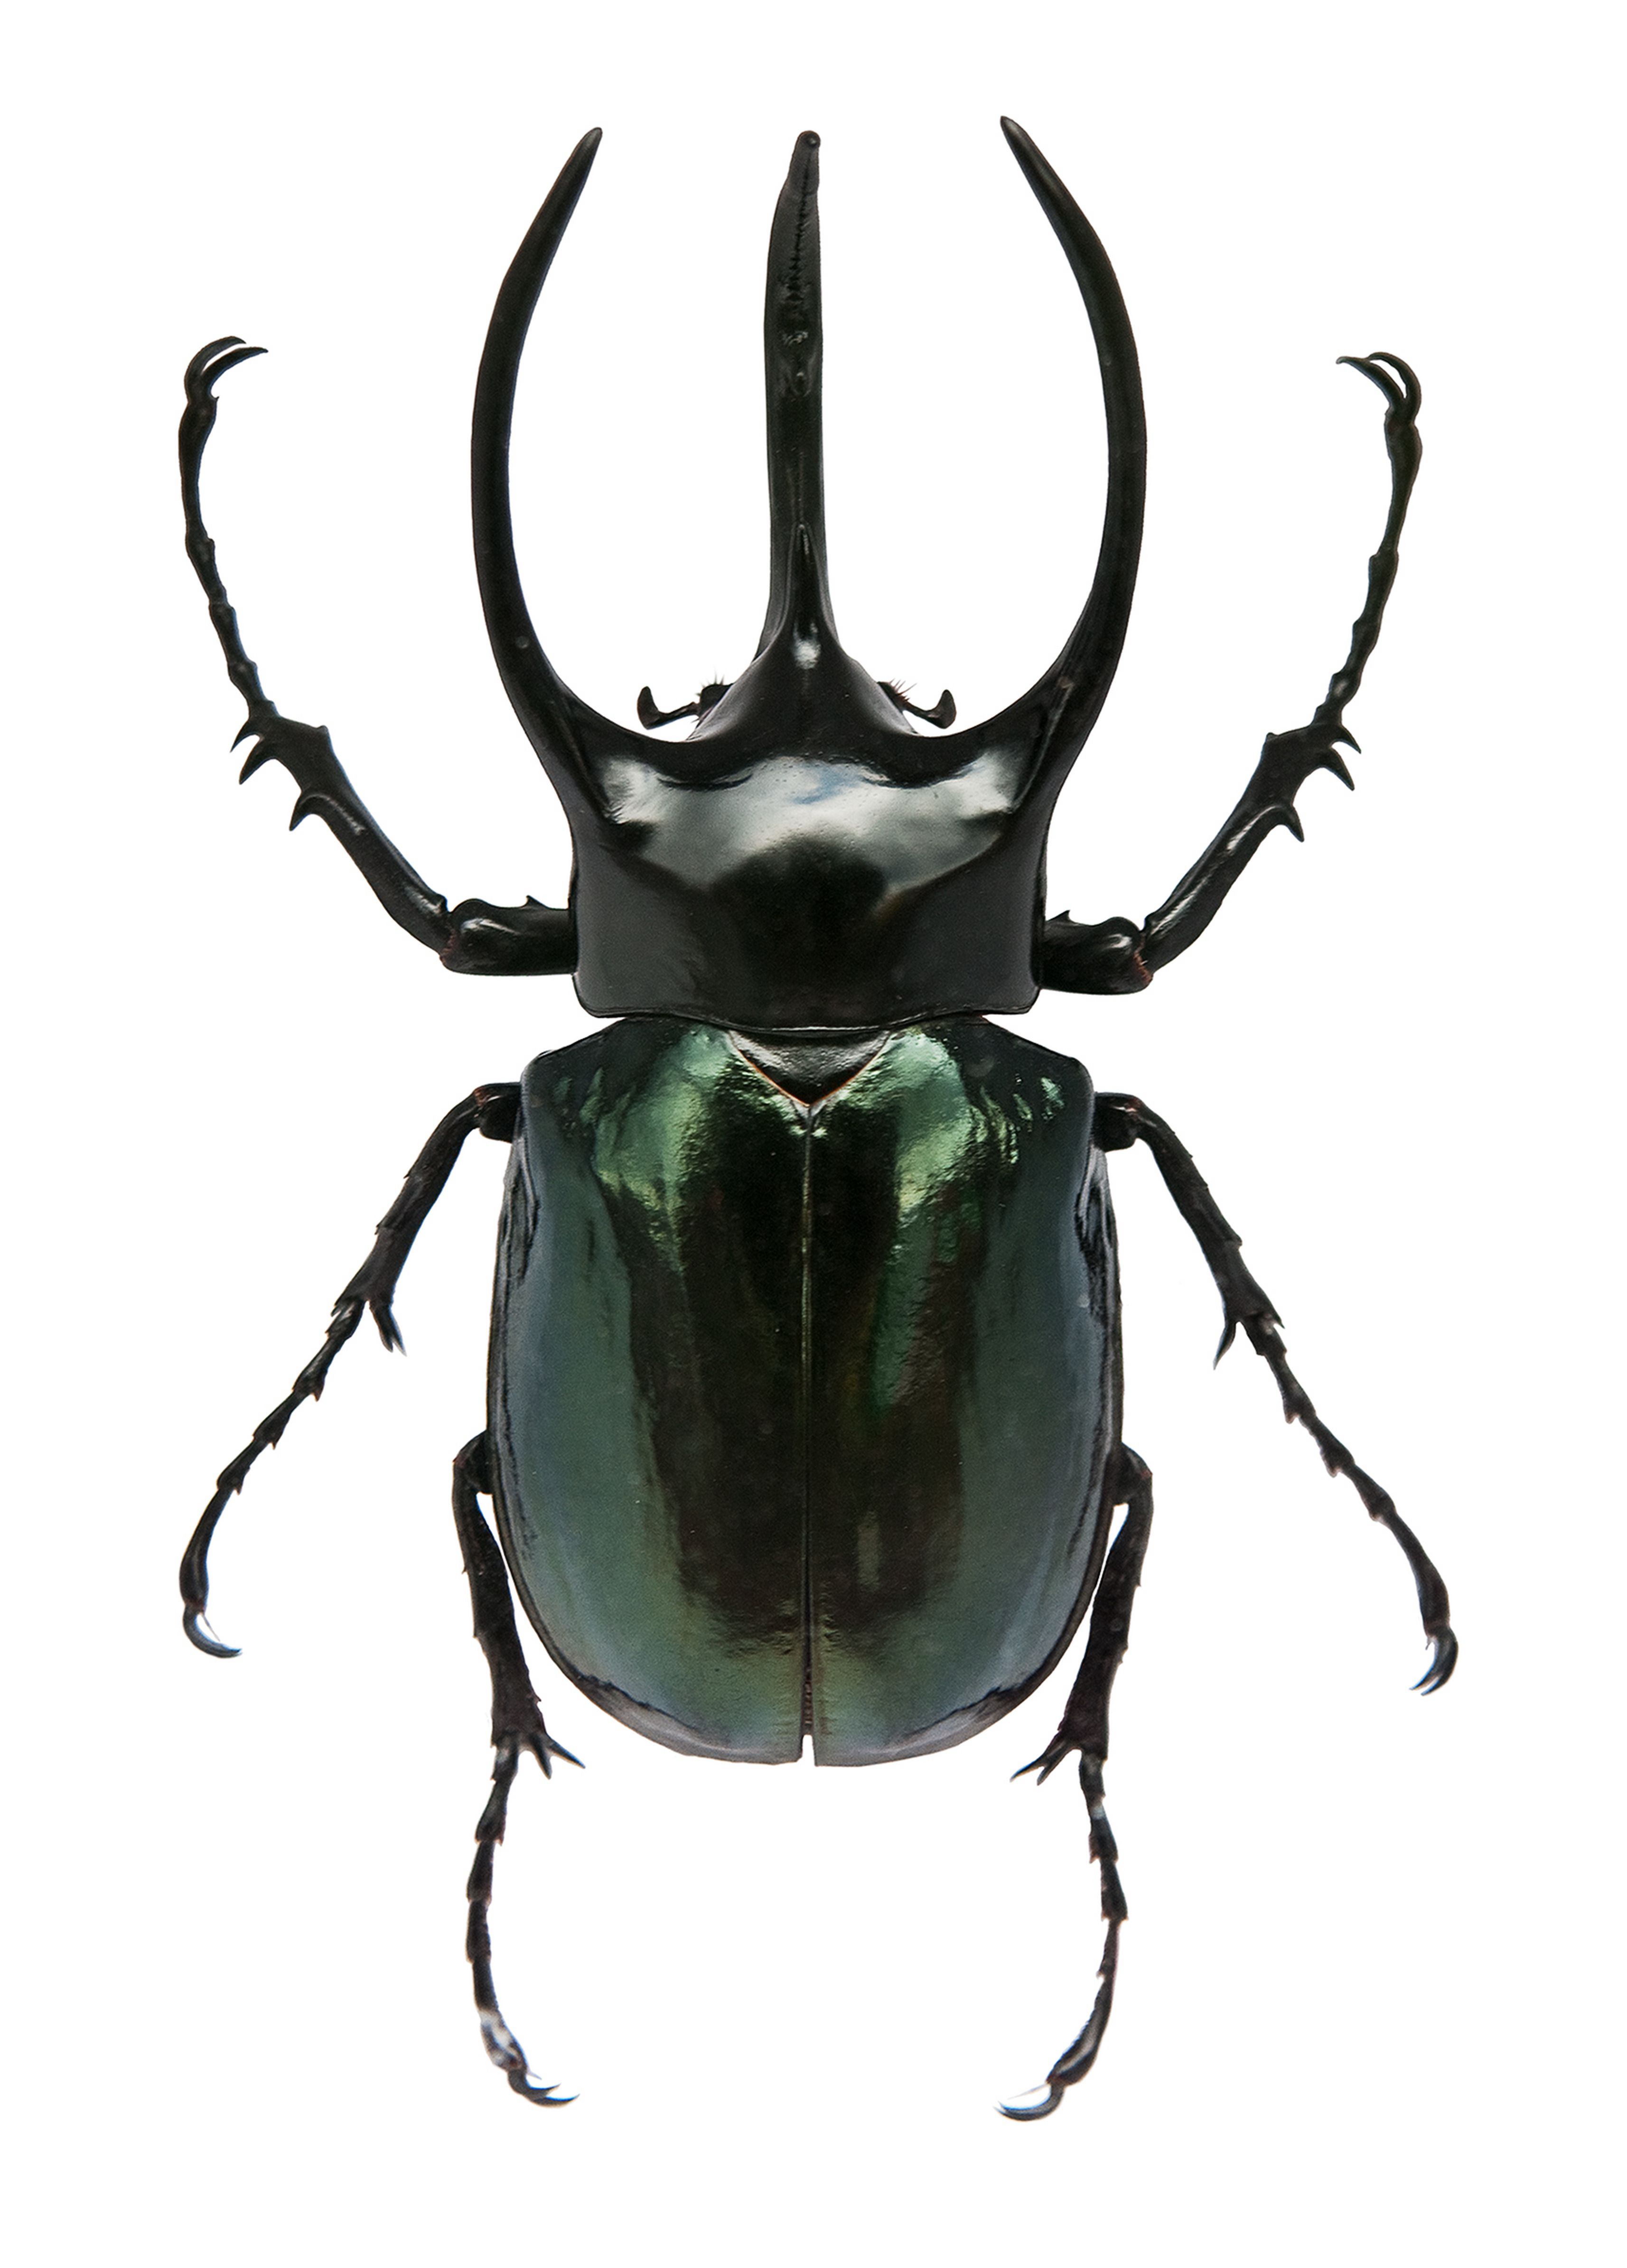 Stag beetle. | Butterfly wings, insects & other fun things ...